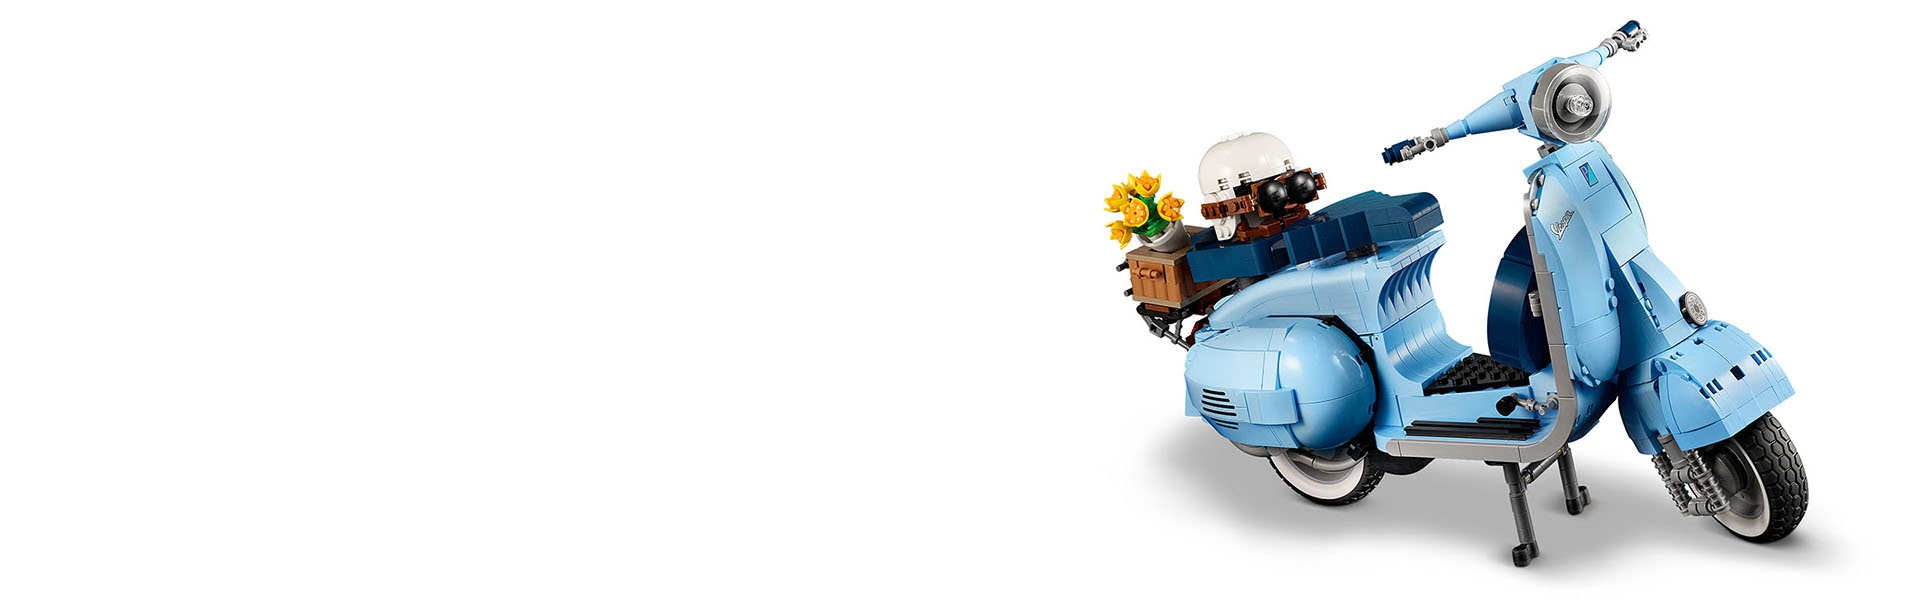 Vespa 125 10298 | UNKNOWN | Buy online at the Official LEGO® Shop US